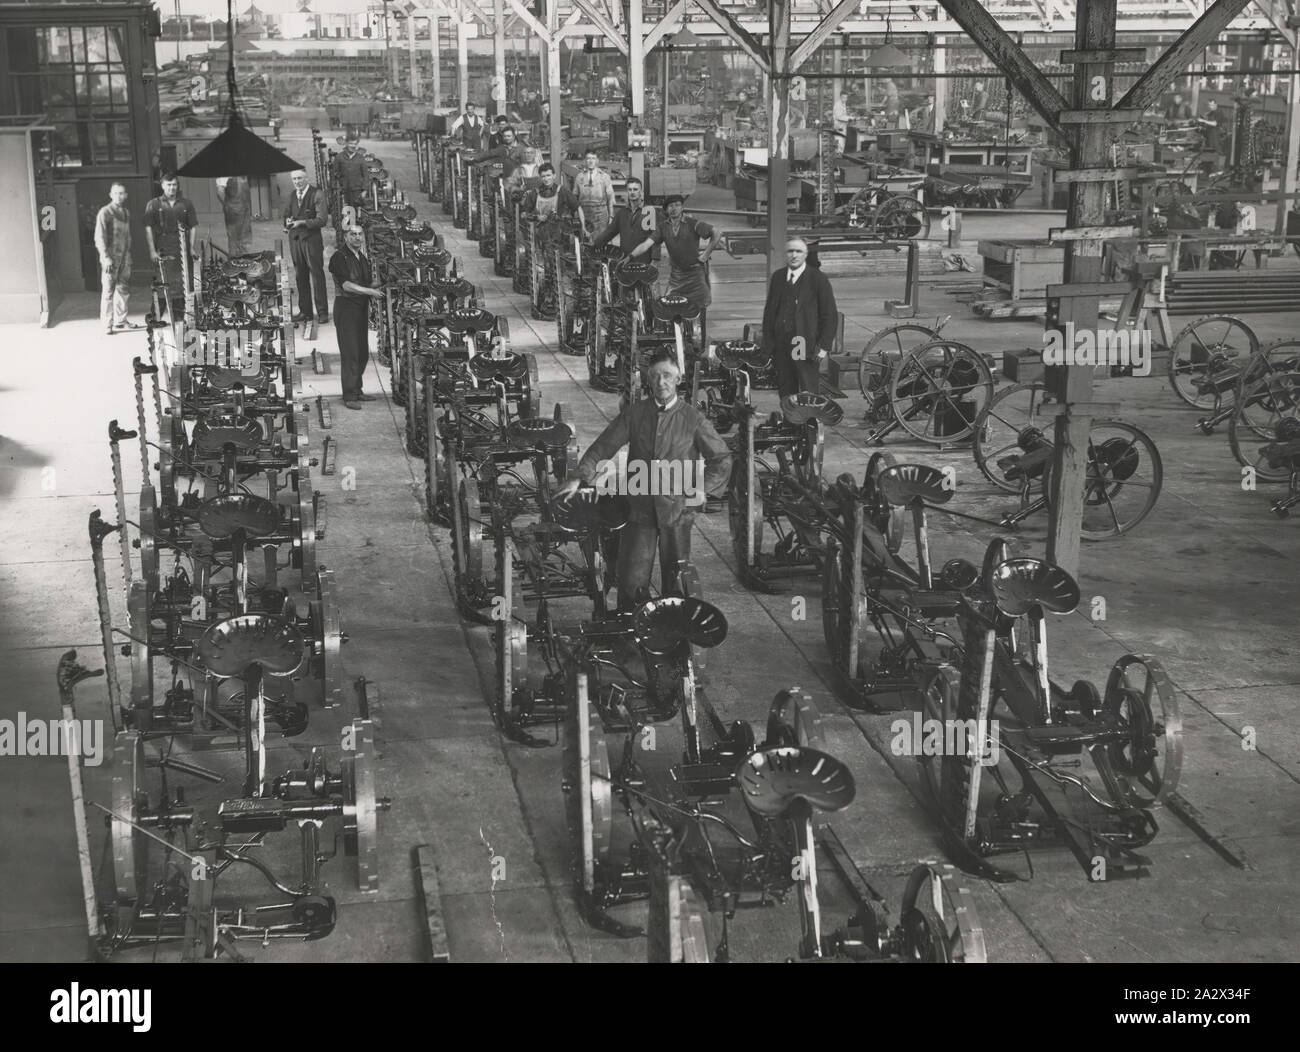 Photograph - H.V. McKay Massey Harris Factory, Mower Assembly Line, Sunshine, circa1946, Photograph of assembly line of finished horsedrawn mowers. part of a collection of photographs, negatives, moving film, artefacts, documents and trade literature belonging to the H. V. McKay Sunshine Collection. The McKay collection is regarded as one of the most significant industrial heritage collections in Australia. the agricultural manufacturing firm Stock Photo